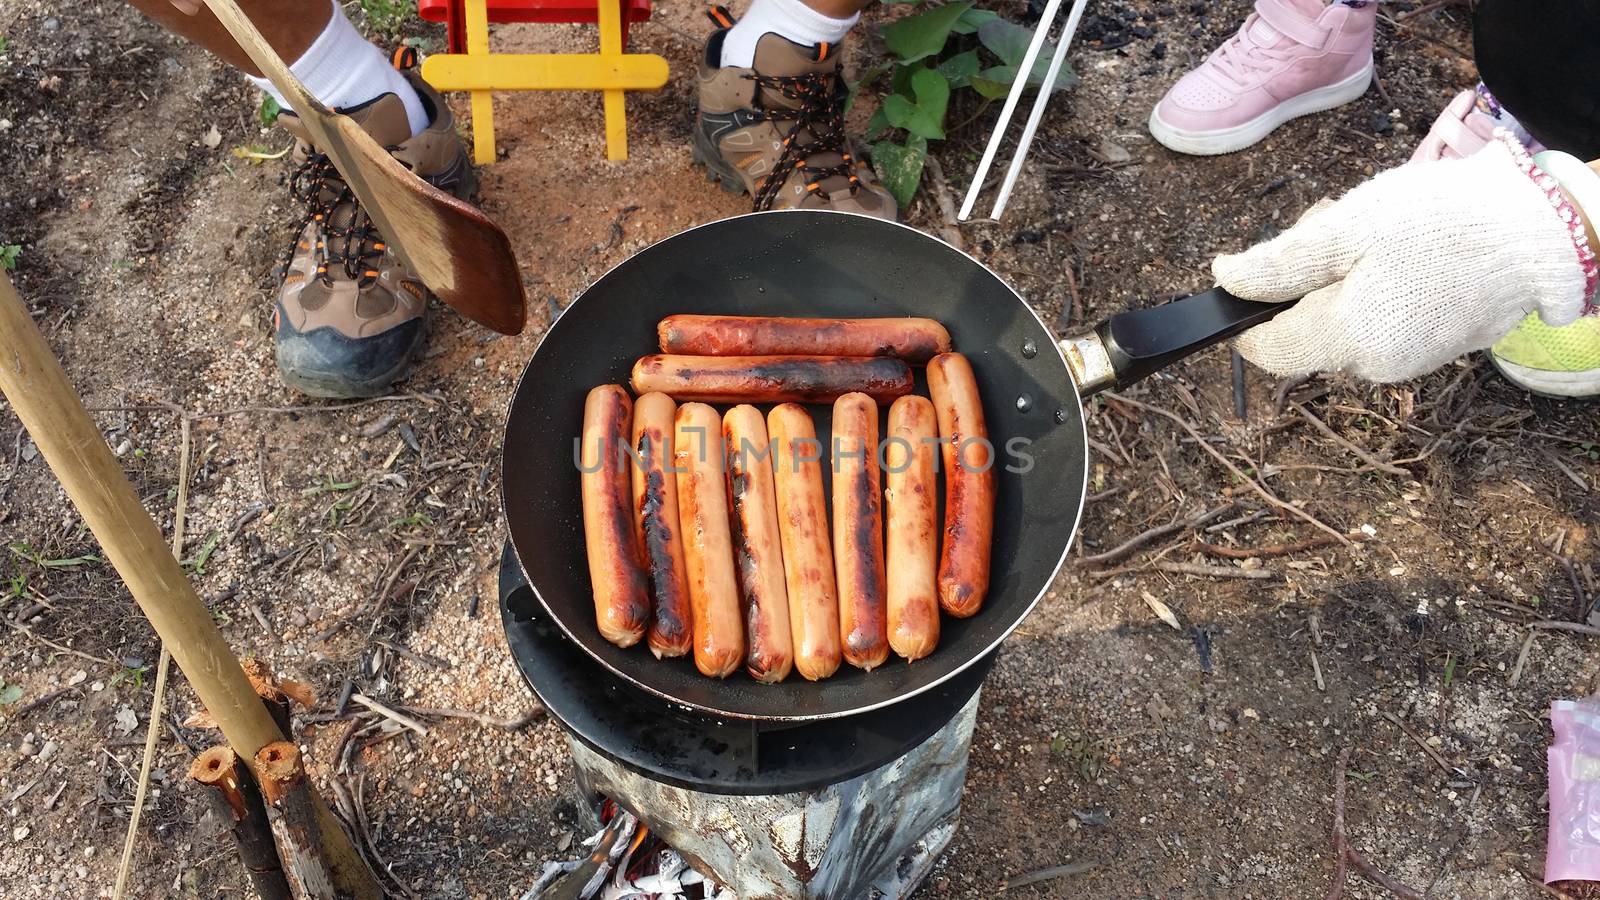 fry sausages on a fire in a pan at forest during summer time.